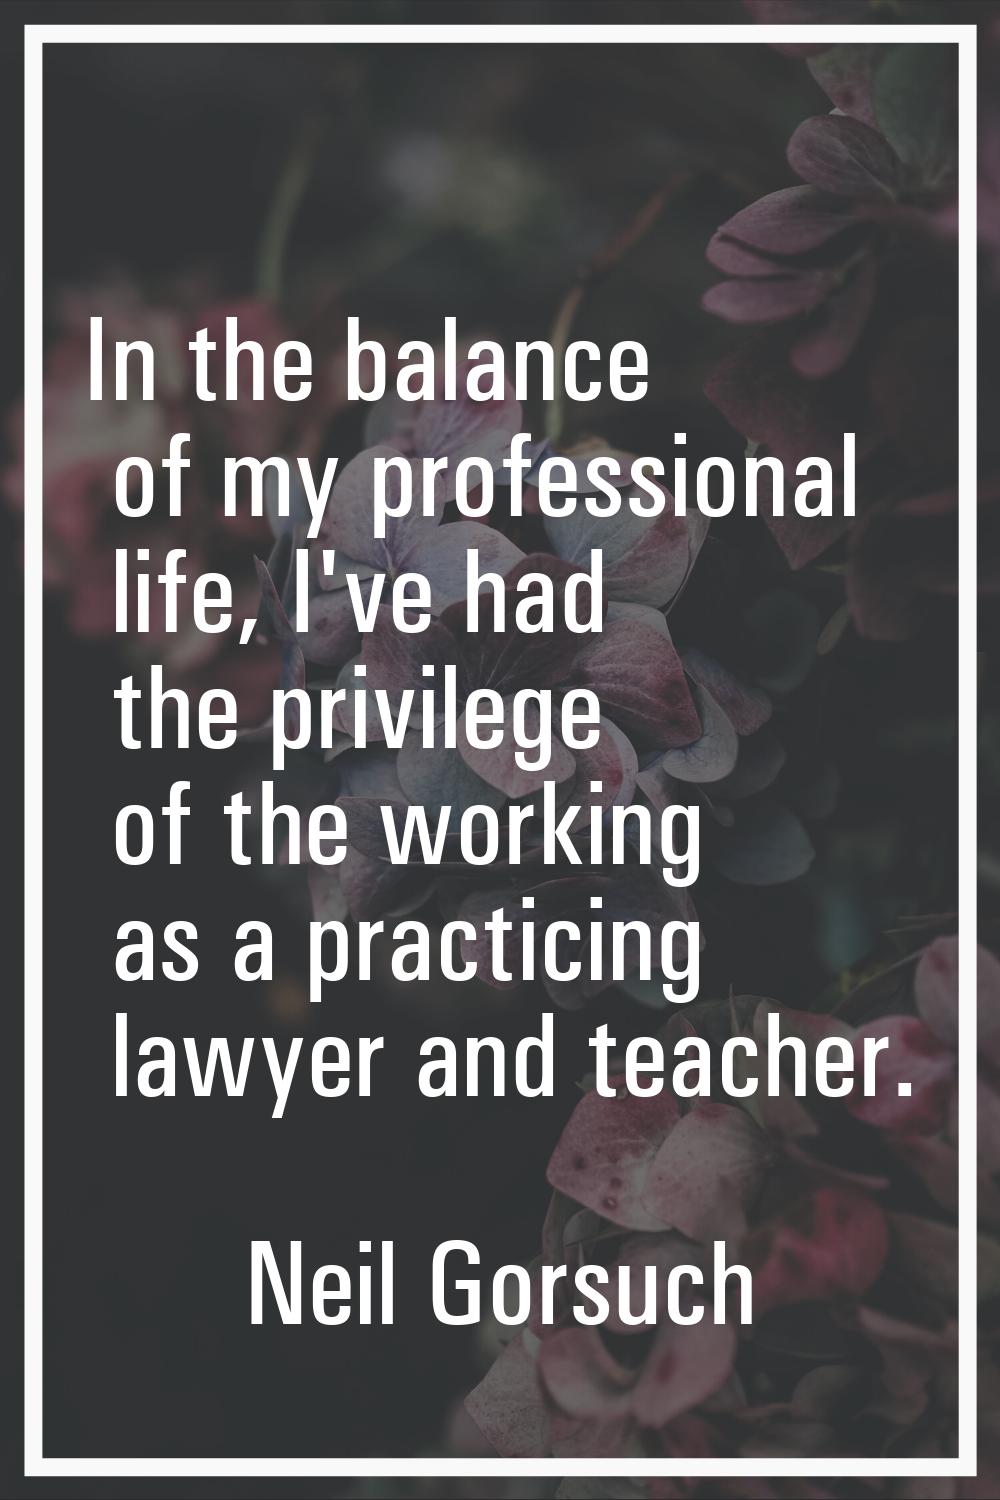 In the balance of my professional life, I've had the privilege of the working as a practicing lawye